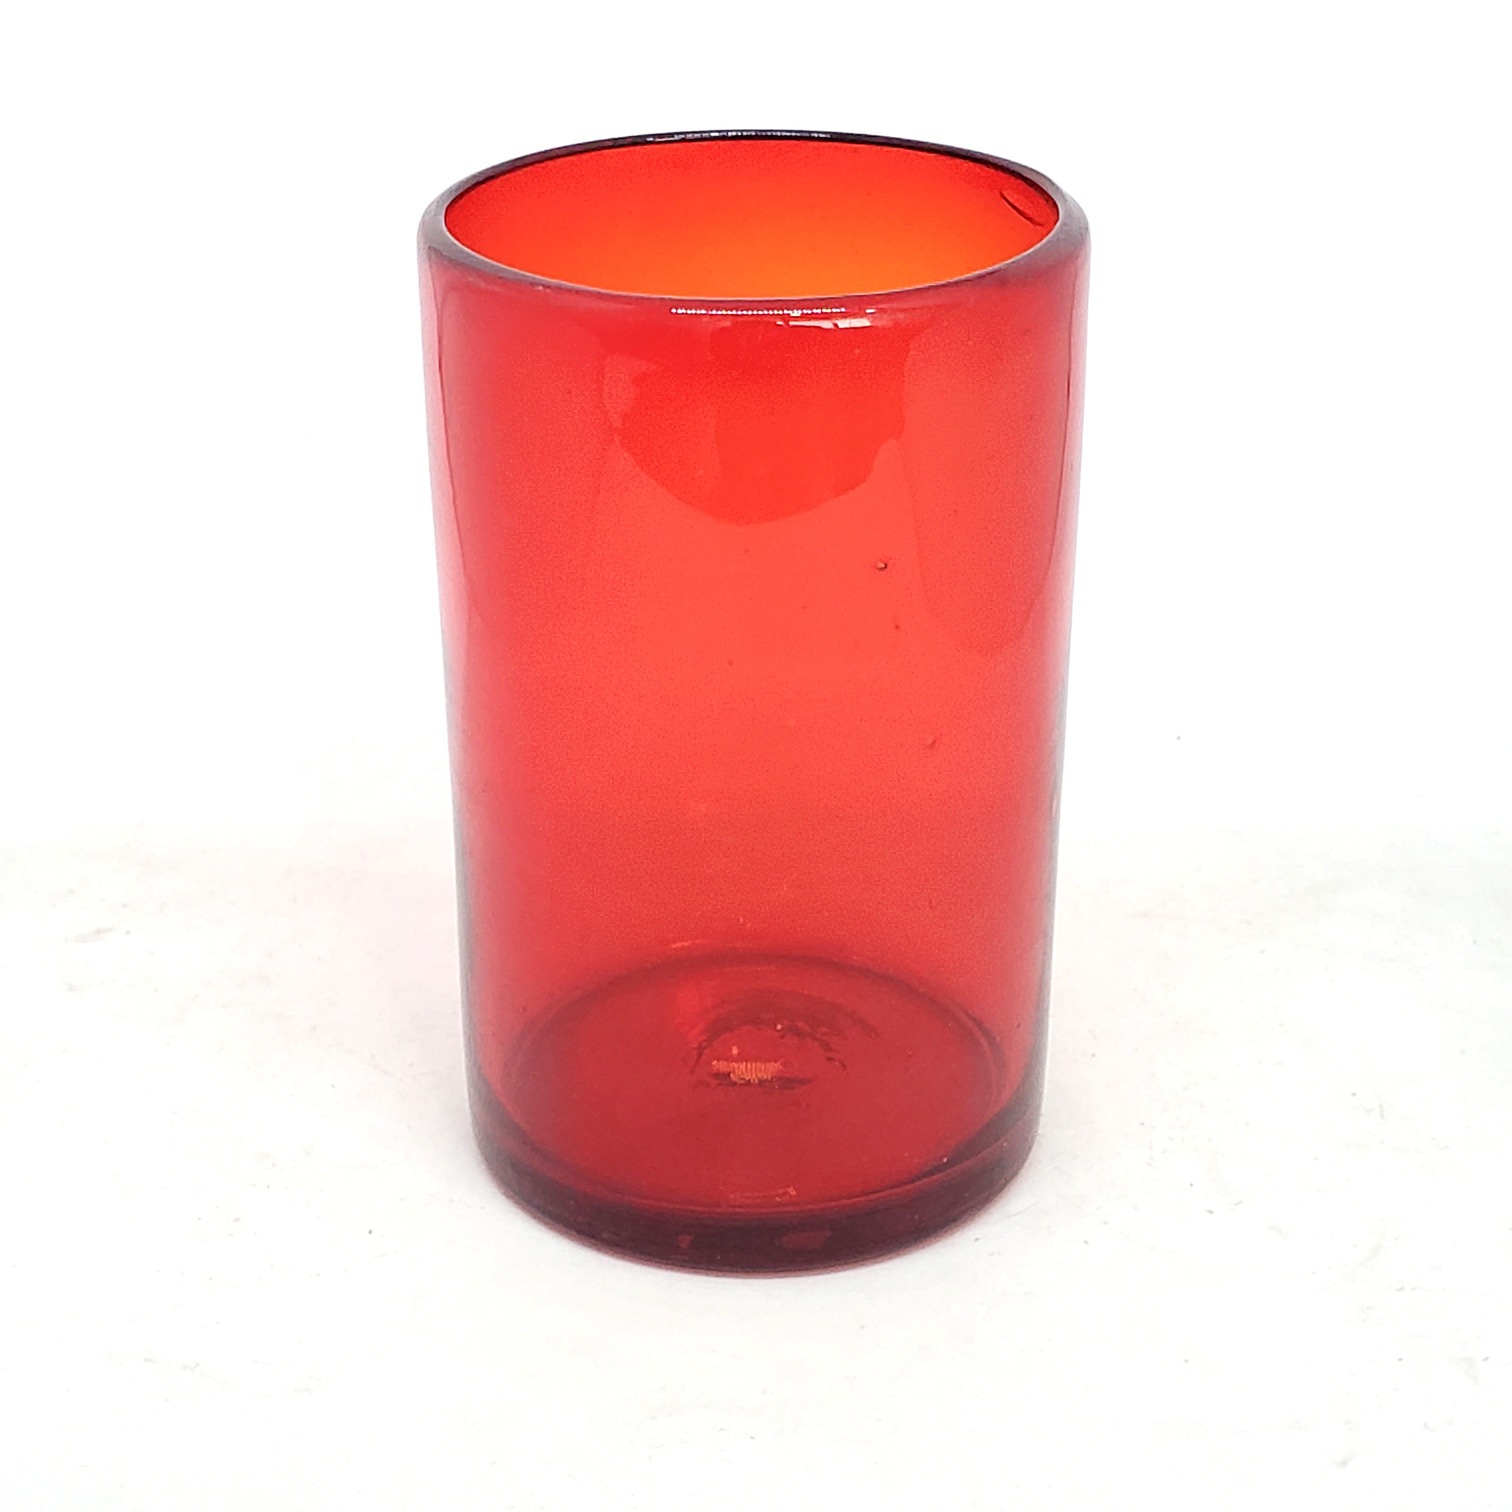 https://mexhandcraft.com/imgProducts/Solid%20Ruby%20Red%2014%20oz%20Drinking%20Glasses%20(set%20of%206)%20(2).jpg